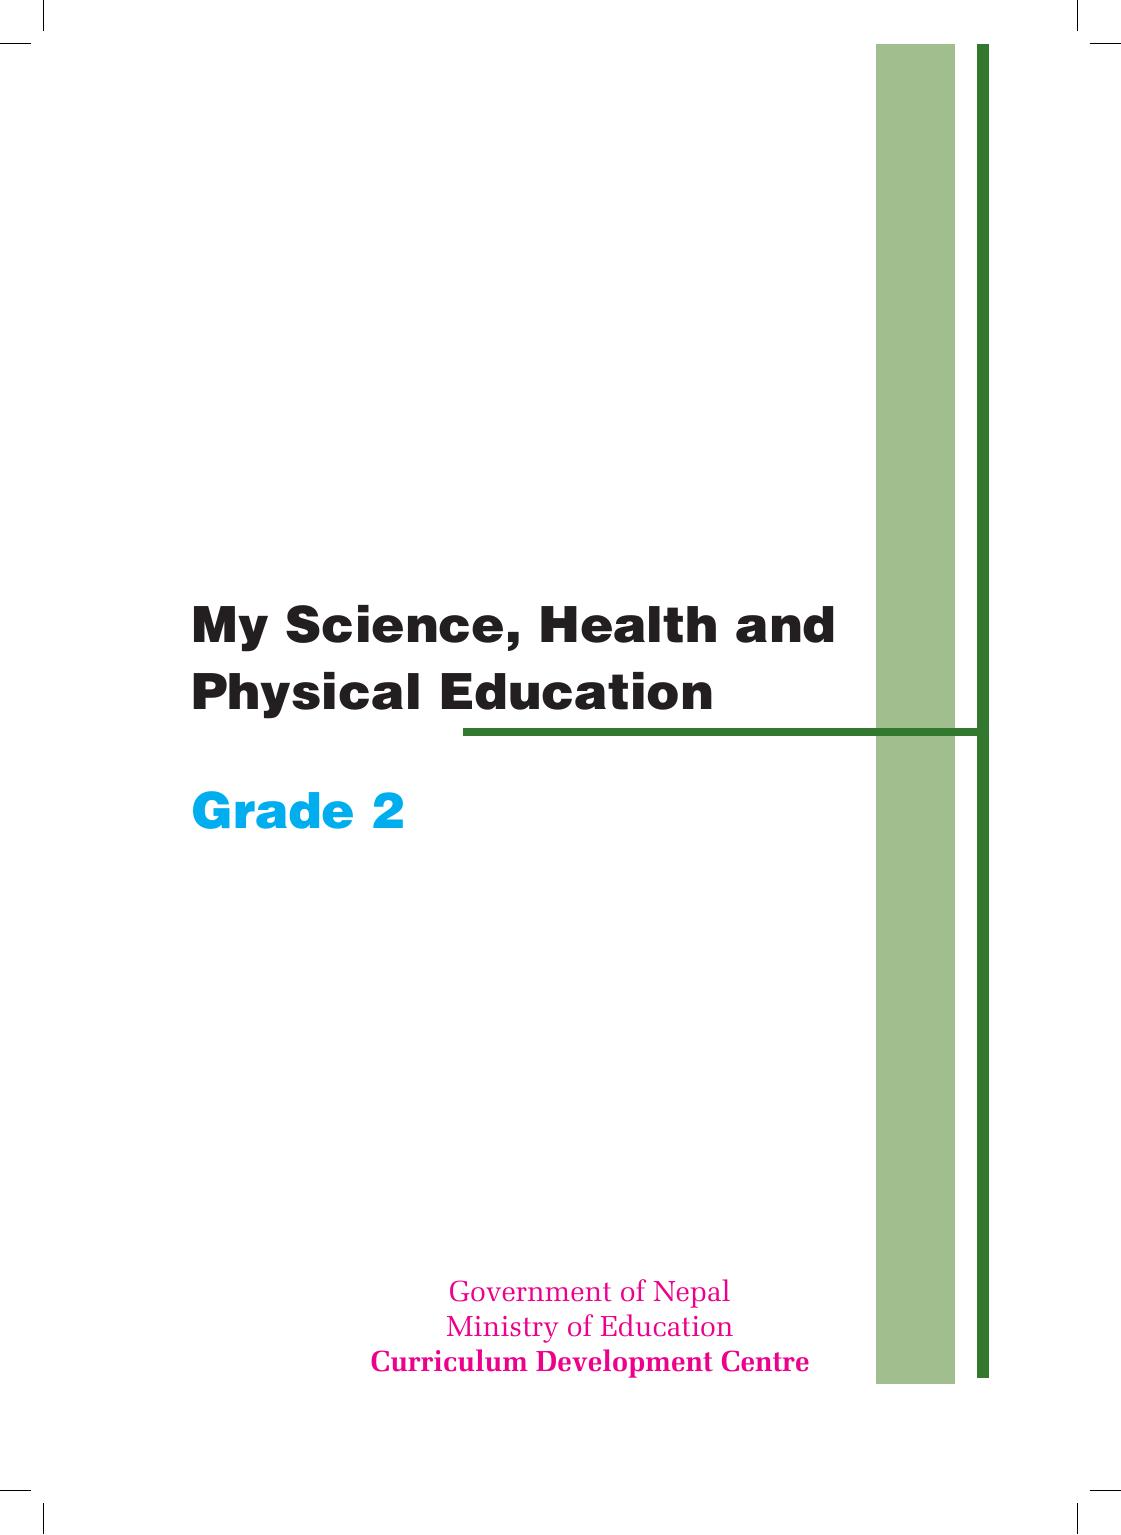 My Science, Health and Physical Education Grade 2